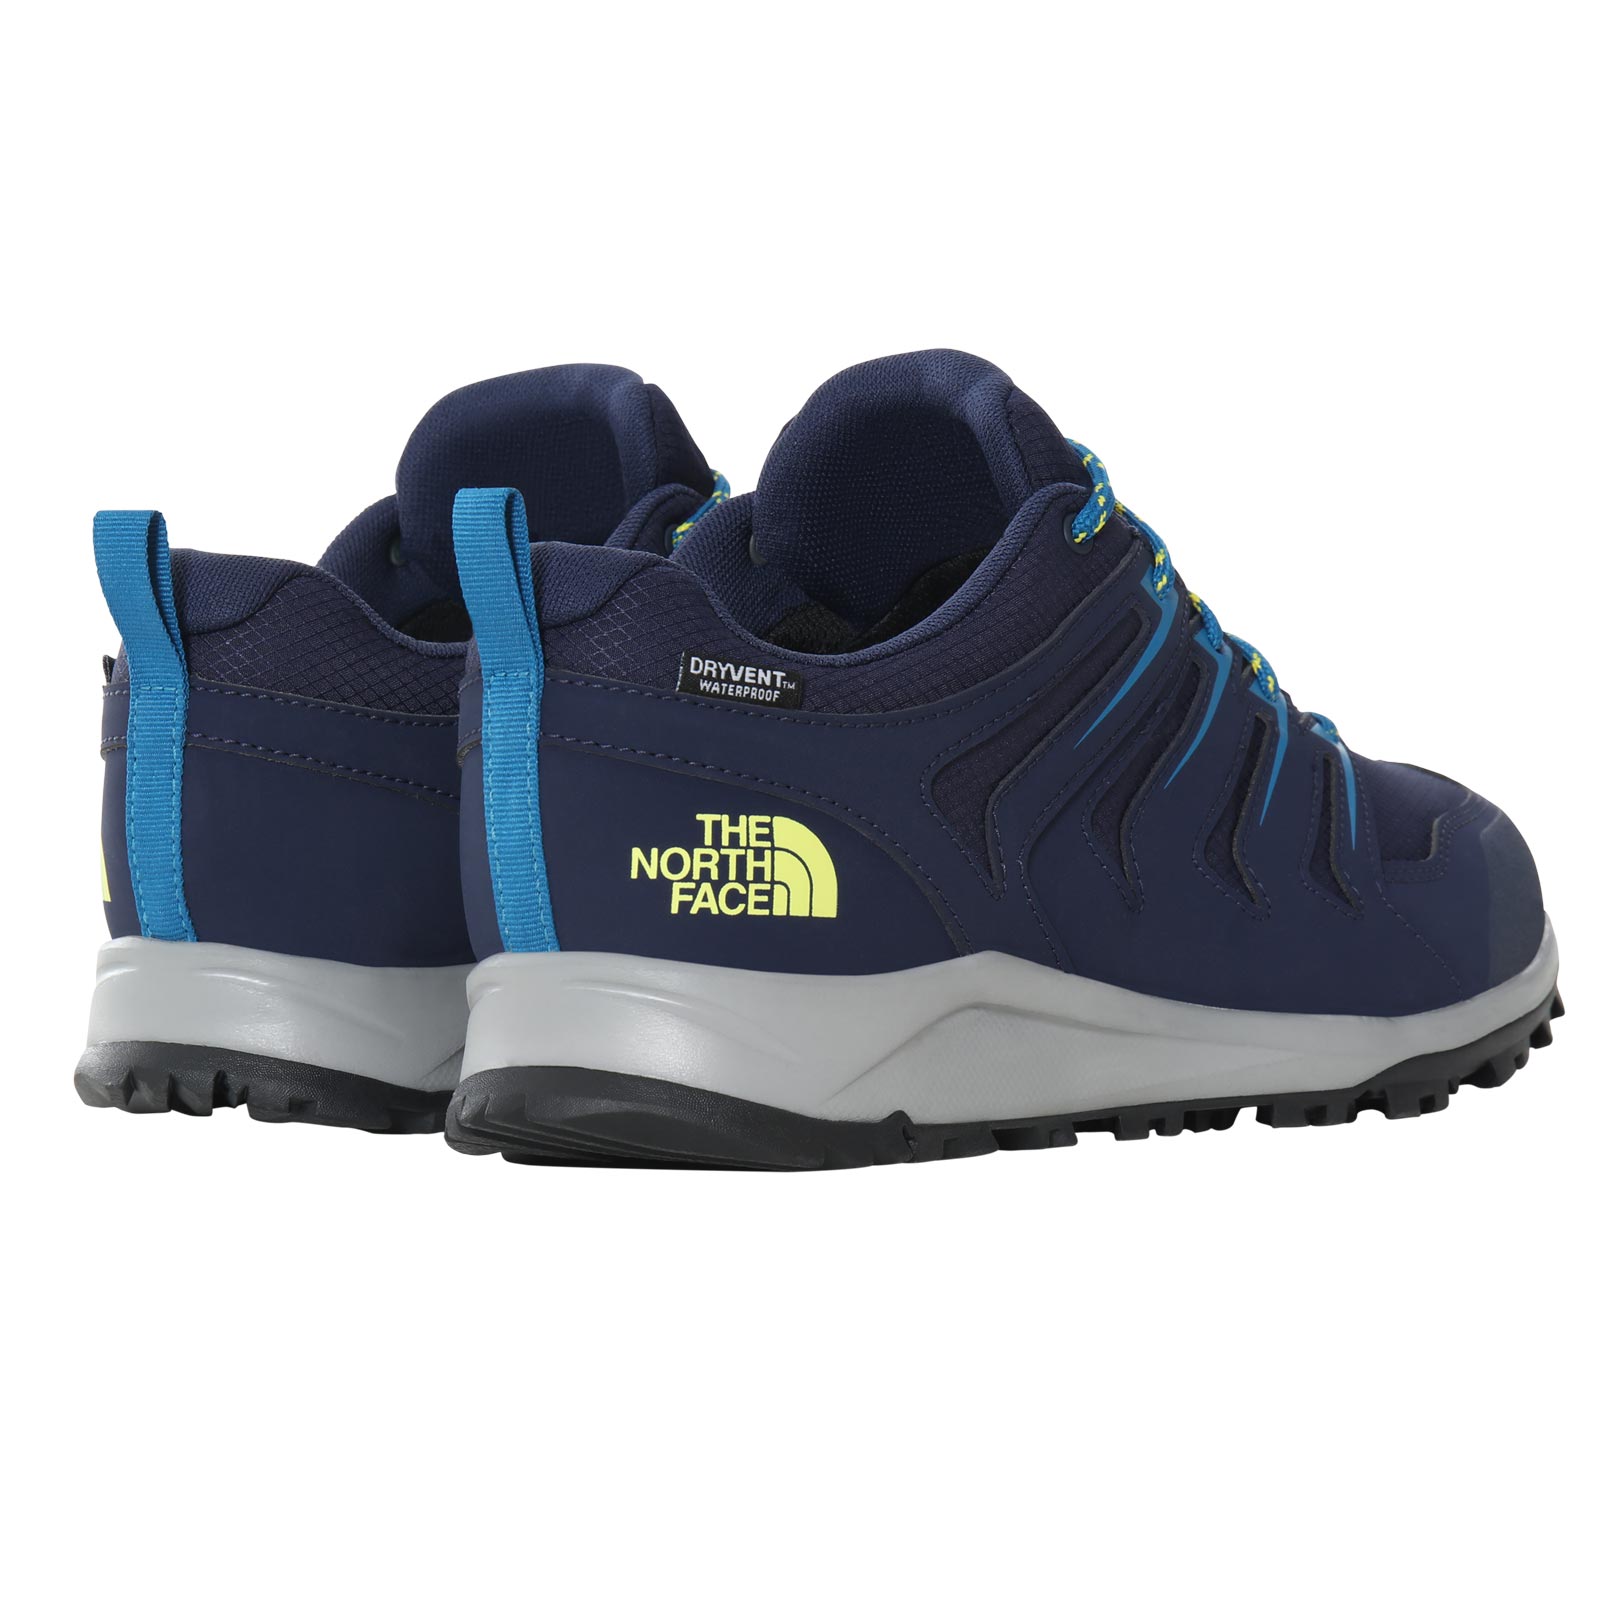 THE NORTH FACE VENTURE FASTHIKE II MENS HIKING SHOES 